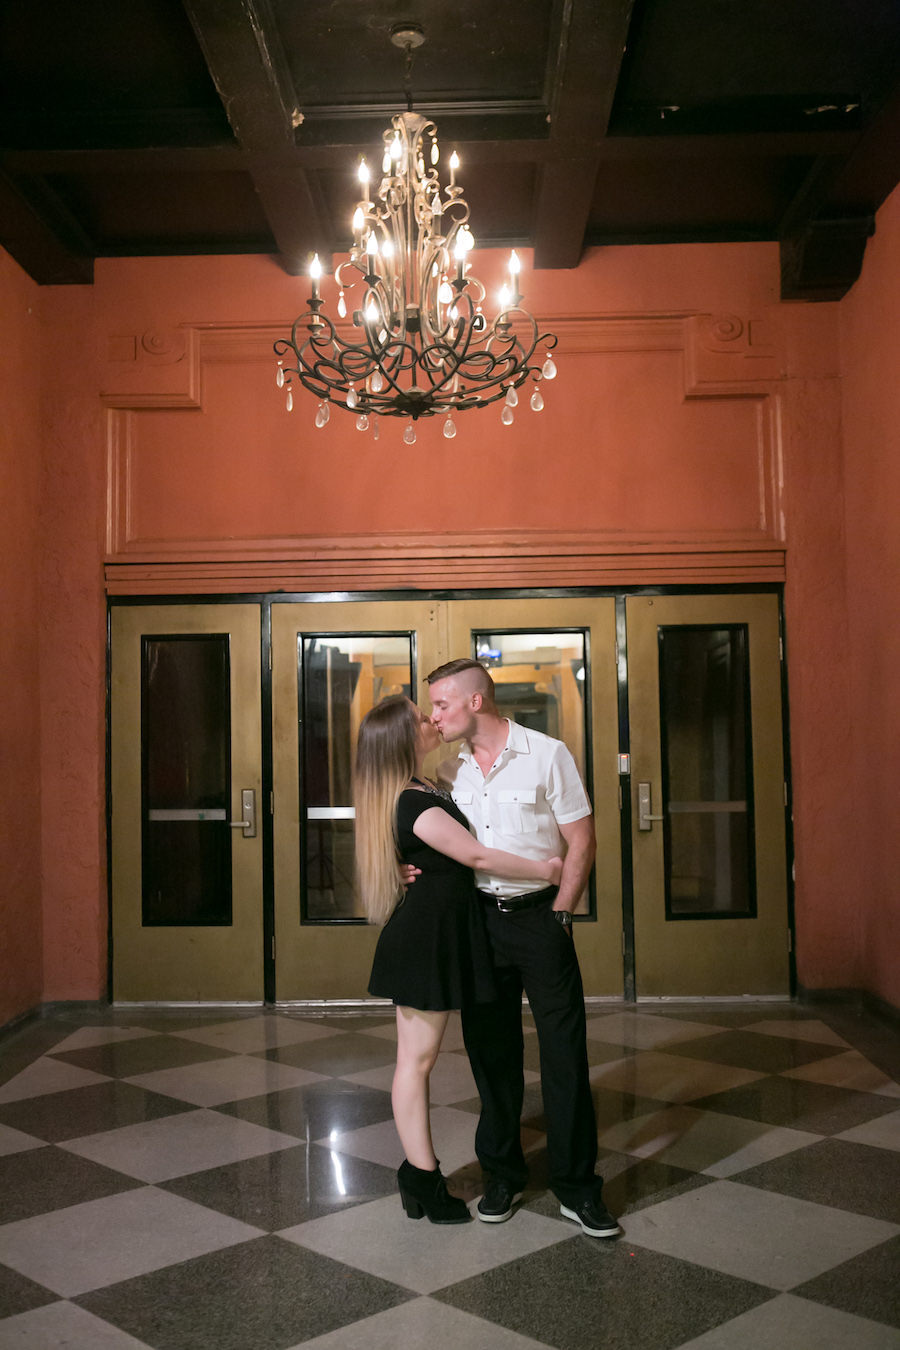 Ybor City Engagement Portrait at Vintage Movie Theatre in Tampa Florida | Muvico Centro | Tampa Wedding Photographer Carrie Wildes Photography